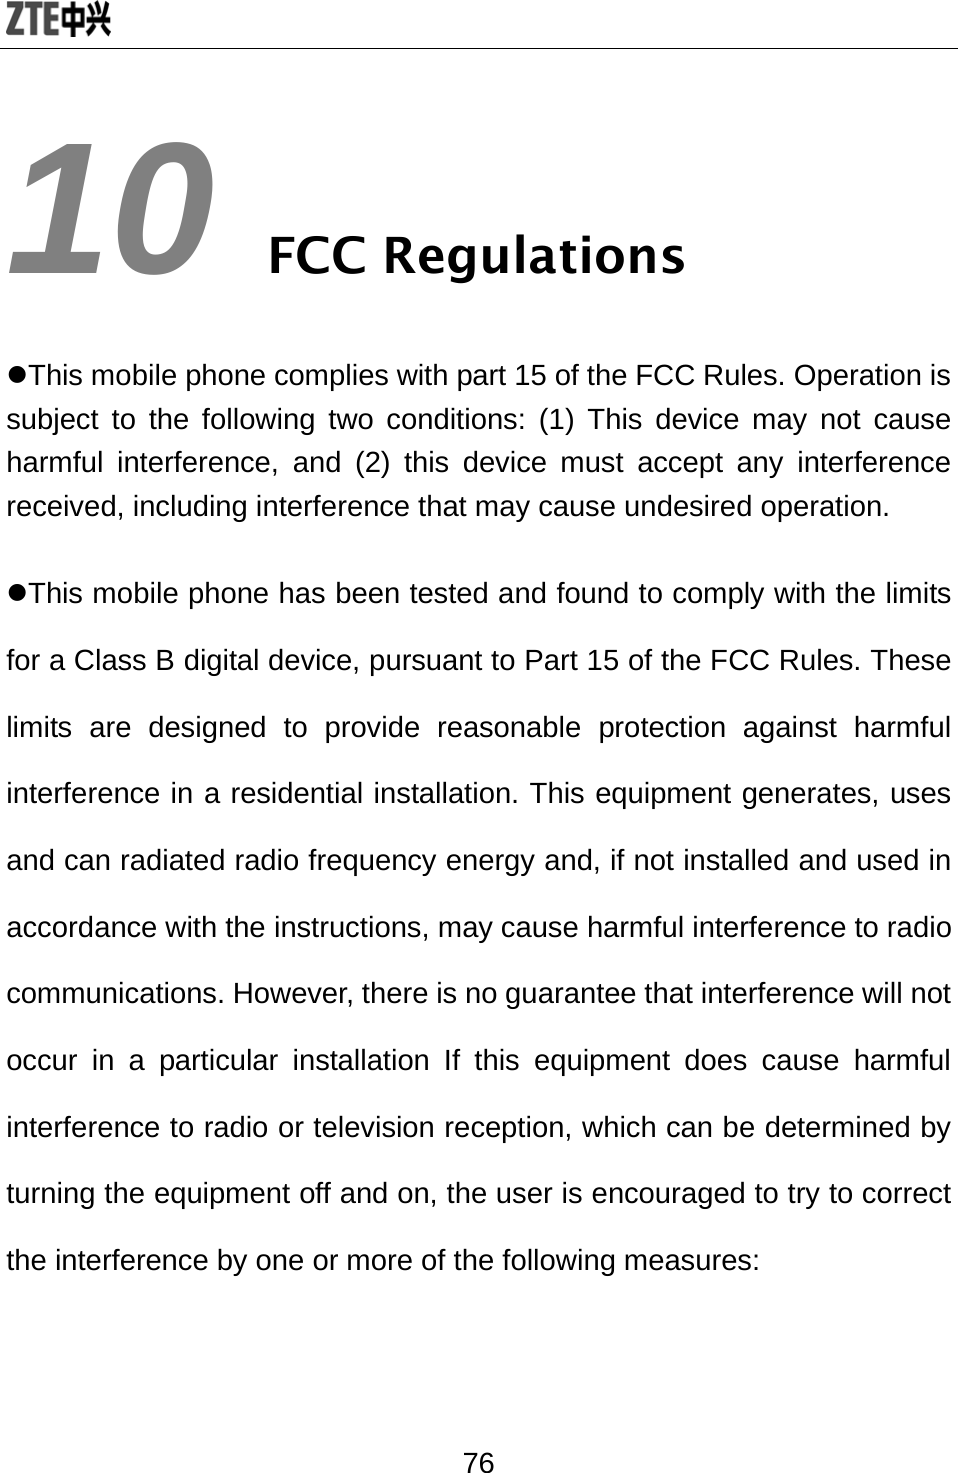  76 10 FCC Regulations zThis mobile phone complies with part 15 of the FCC Rules. Operation is subject to the following two conditions: (1) This device may not cause harmful interference, and (2) this device must accept any interference received, including interference that may cause undesired operation. zThis mobile phone has been tested and found to comply with the limits for a Class B digital device, pursuant to Part 15 of the FCC Rules. These limits are designed to provide reasonable protection against harmful interference in a residential installation. This equipment generates, uses and can radiated radio frequency energy and, if not installed and used in accordance with the instructions, may cause harmful interference to radio communications. However, there is no guarantee that interference will not occur in a particular installation If this equipment does cause harmful interference to radio or television reception, which can be determined by turning the equipment off and on, the user is encouraged to try to correct the interference by one or more of the following measures:  